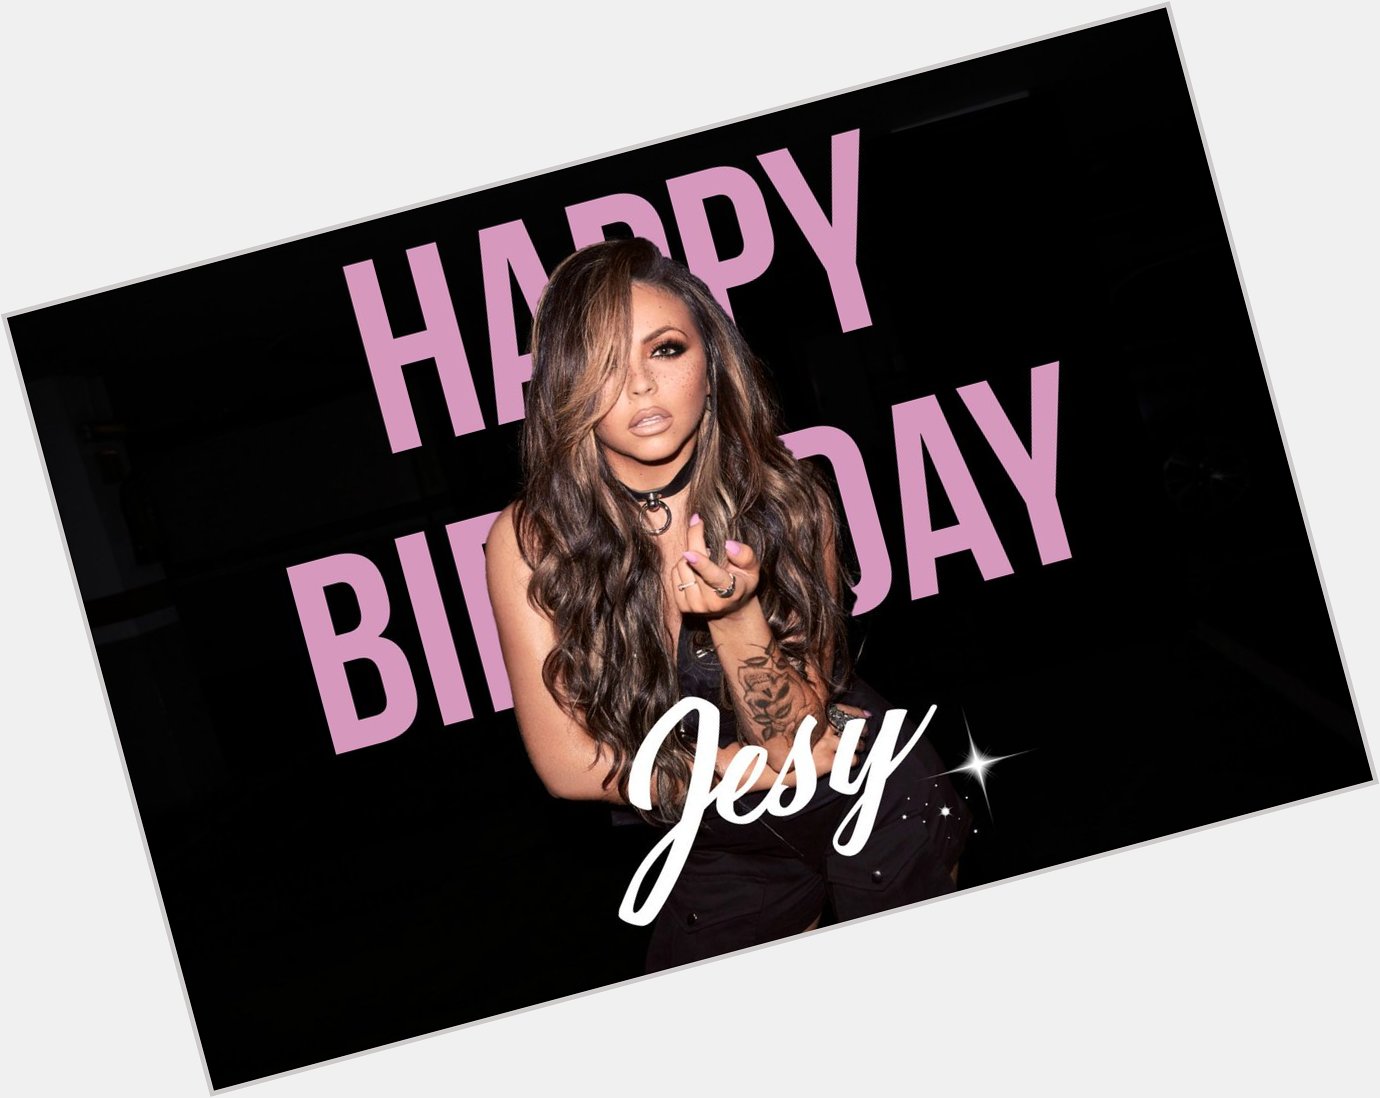 Happy Birthday Jesy Nelson Stay Gorgeous, Kind and Inspiring. Love you lots     